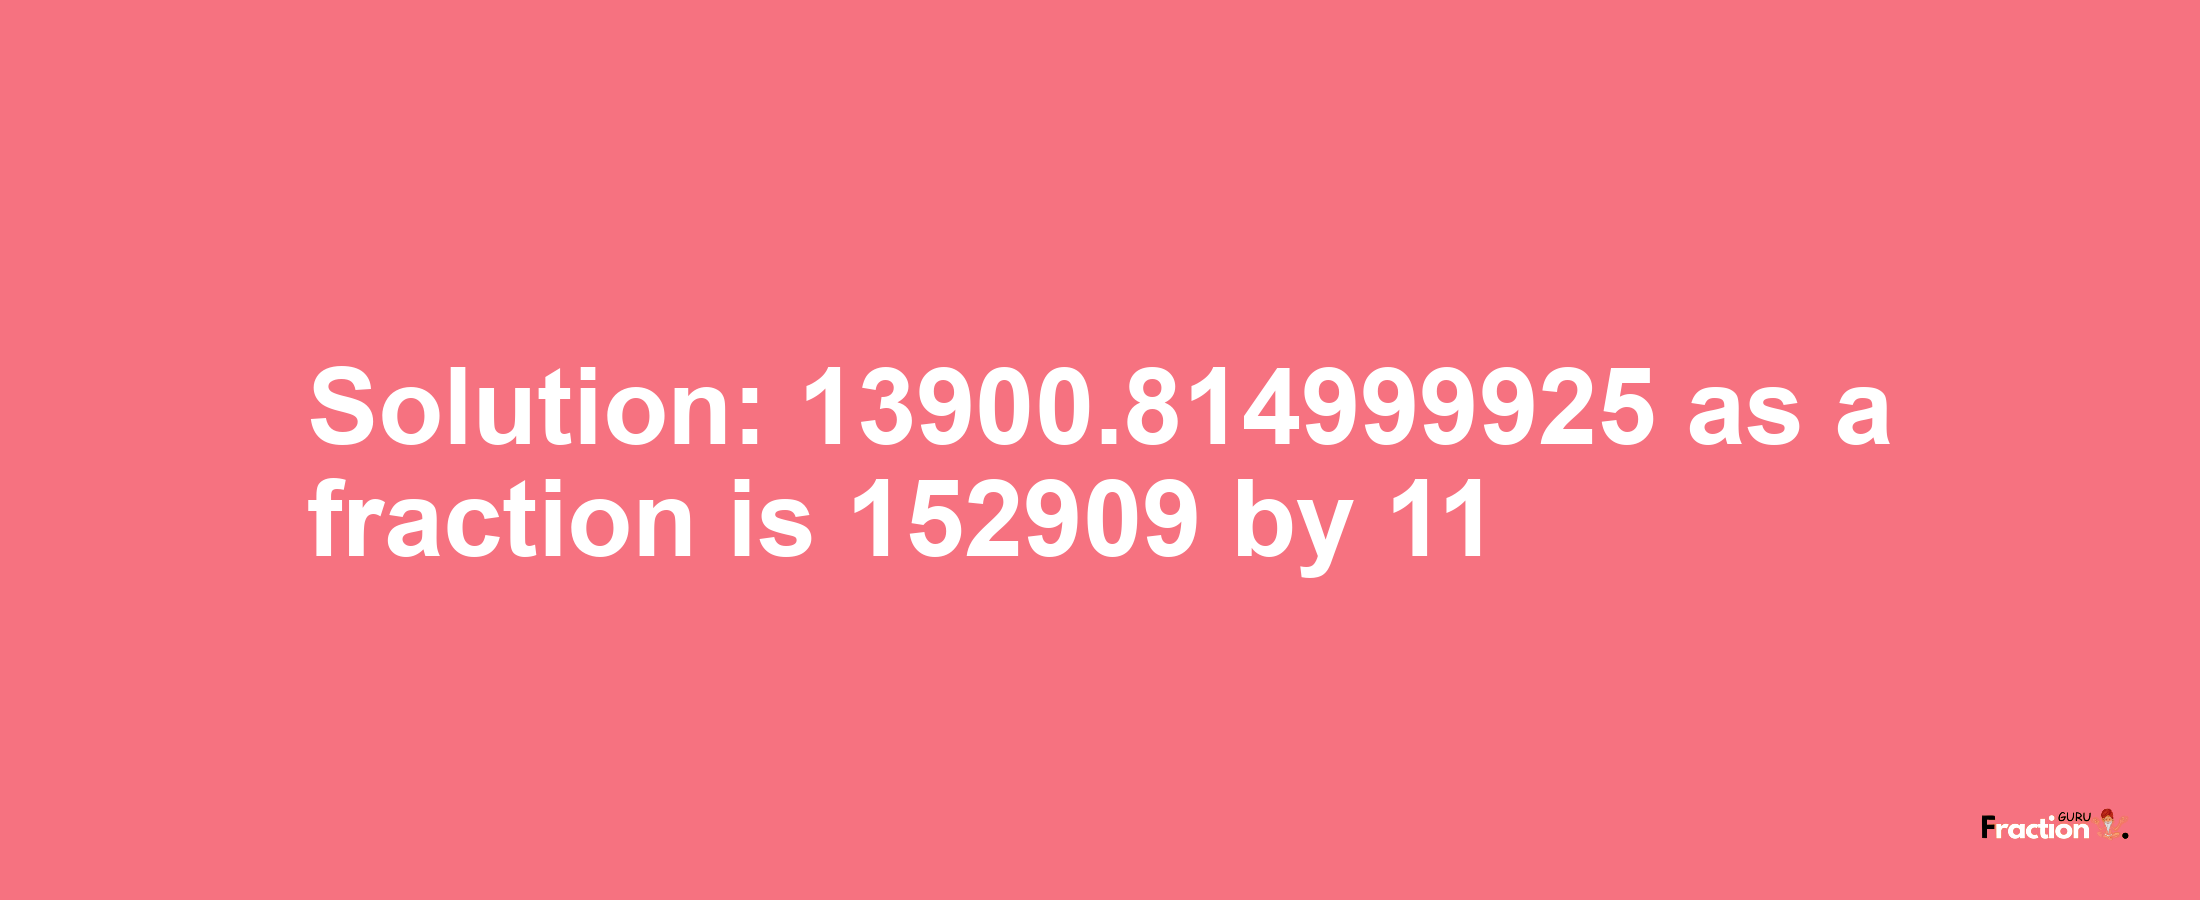 Solution:13900.814999925 as a fraction is 152909/11